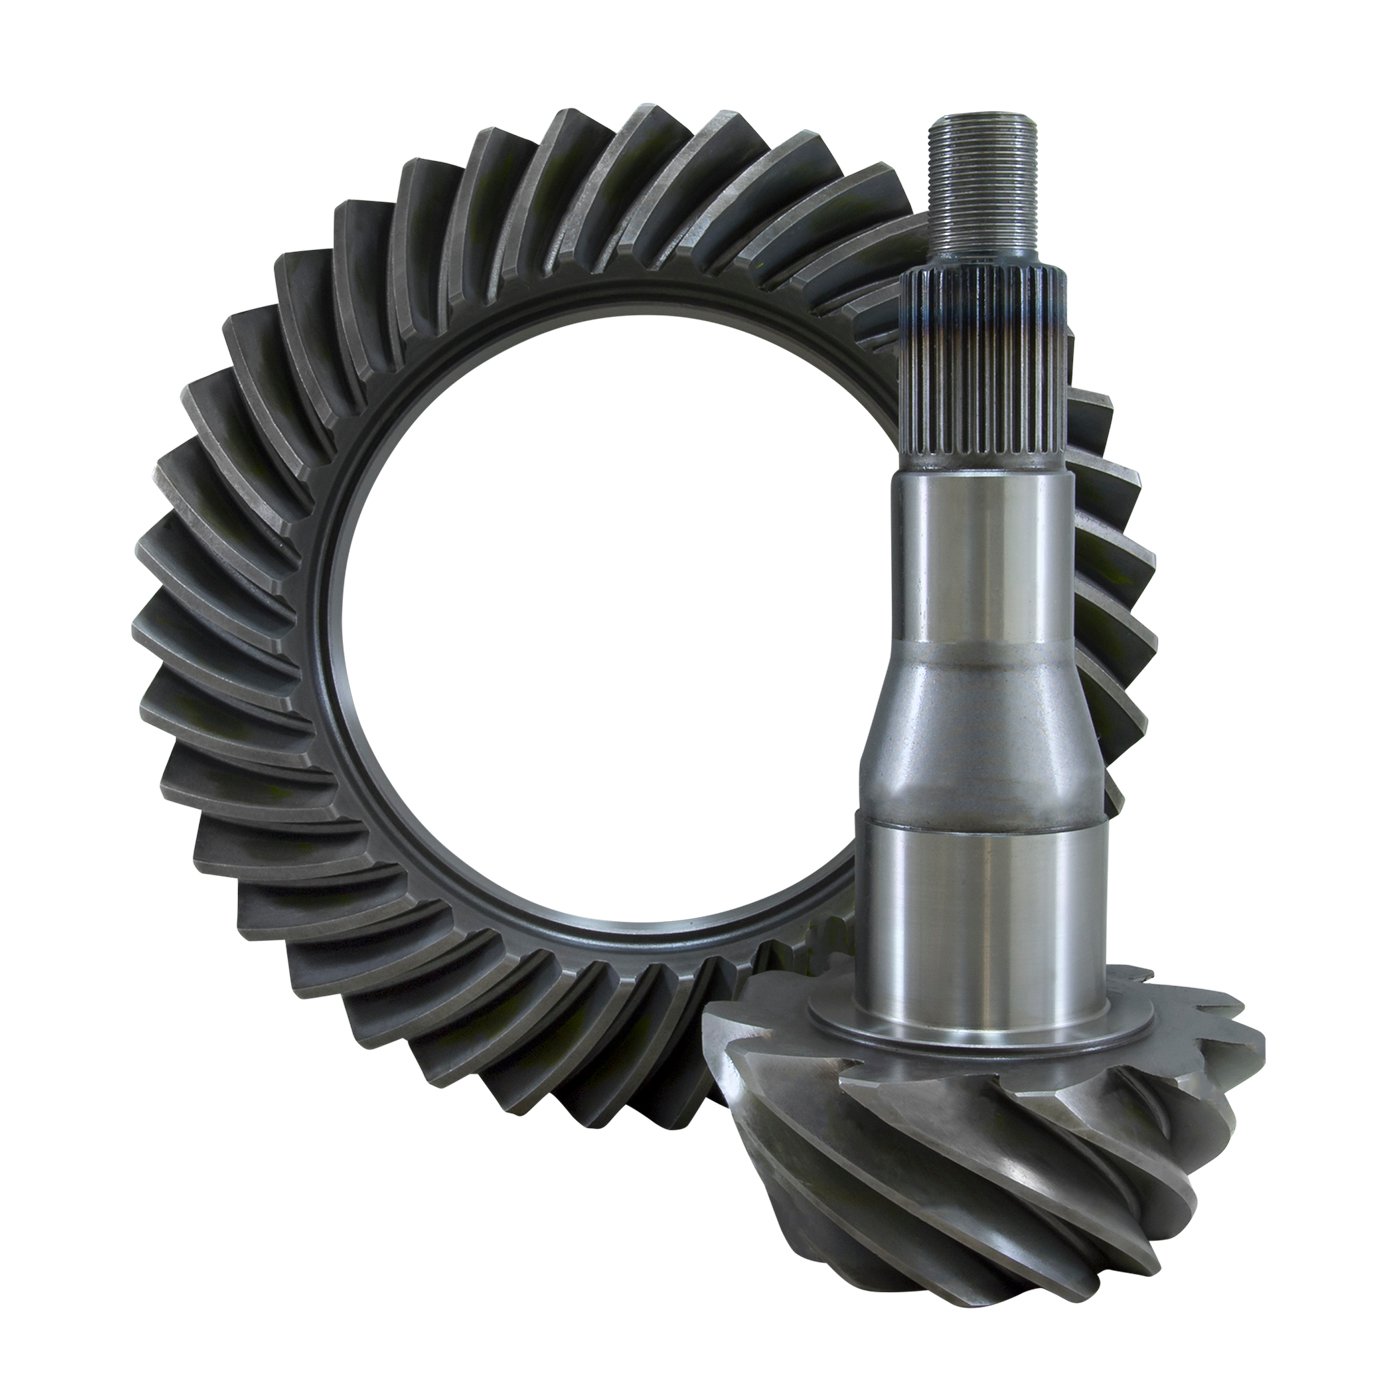 USA Standard 36294 Ring & Pinion Gear Set, For '11 & Up Ford 9.75 in., 3.73 Ratio